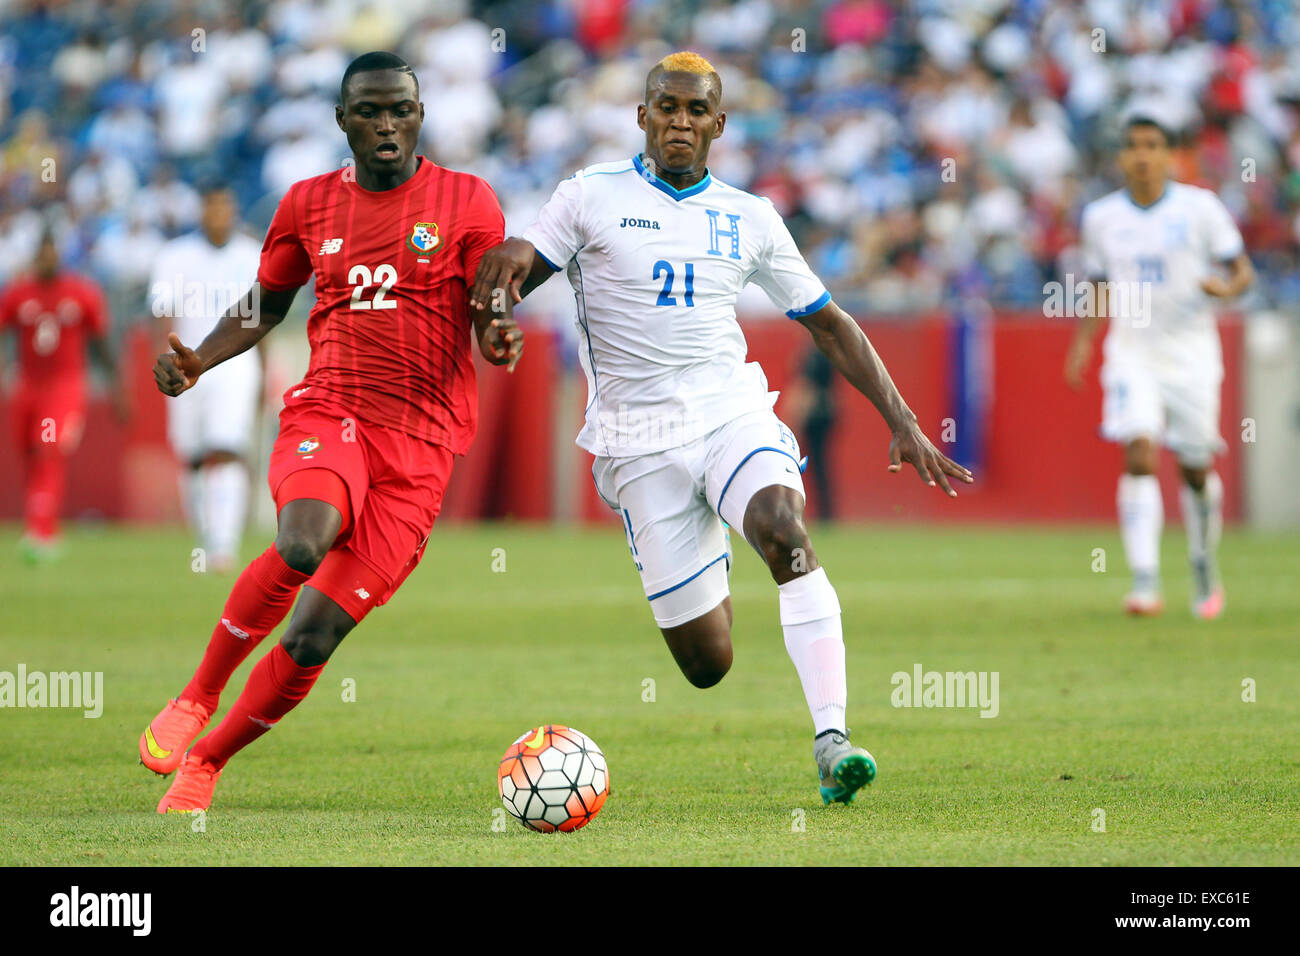 July 10, 2015; Foxborough, MA, USA; Panama forward Abdiel Arroyo (22) and Honduras defender Brayan Beckeles (21) chase down the ball during the second half of the CONCACAF Gold Cup match between Panama and Honduras at Gillette Stadium. The match ended in a 1-1 tie. Anthony Nesmith/Cal Sport Media Stock Photo